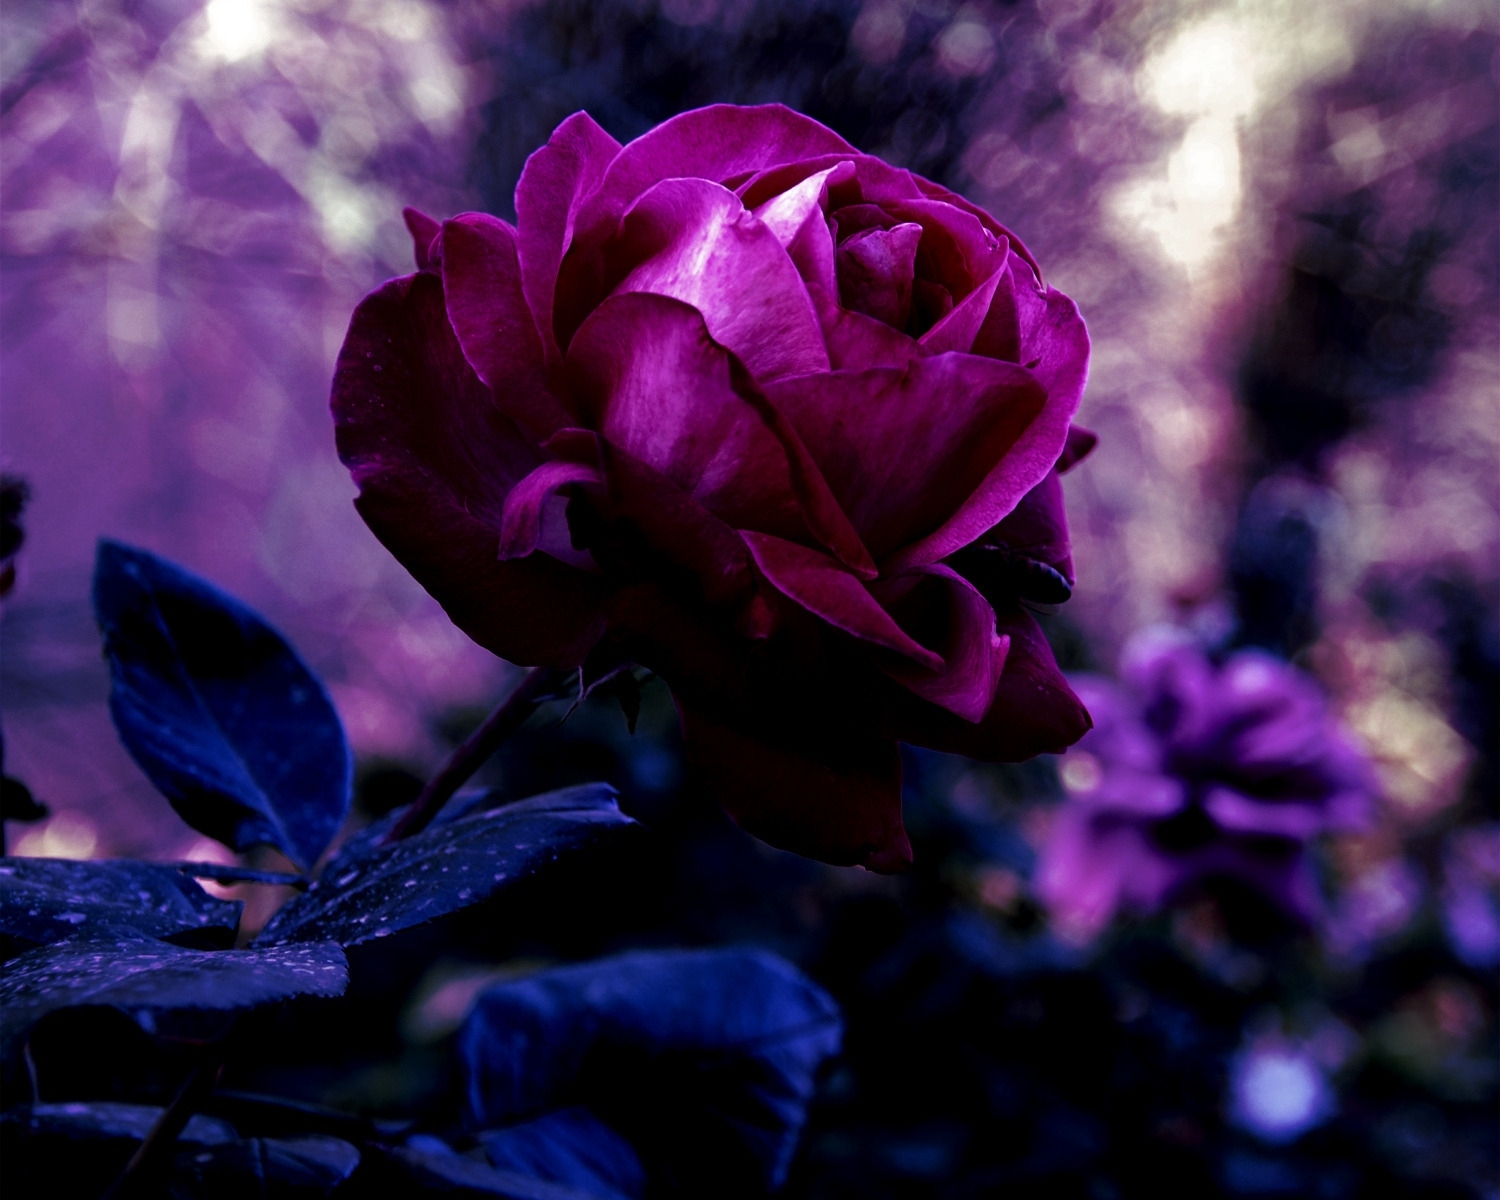 Download PC Wallpaper rose flower, flowers, drops, rose, bud, blur, smooth, evening